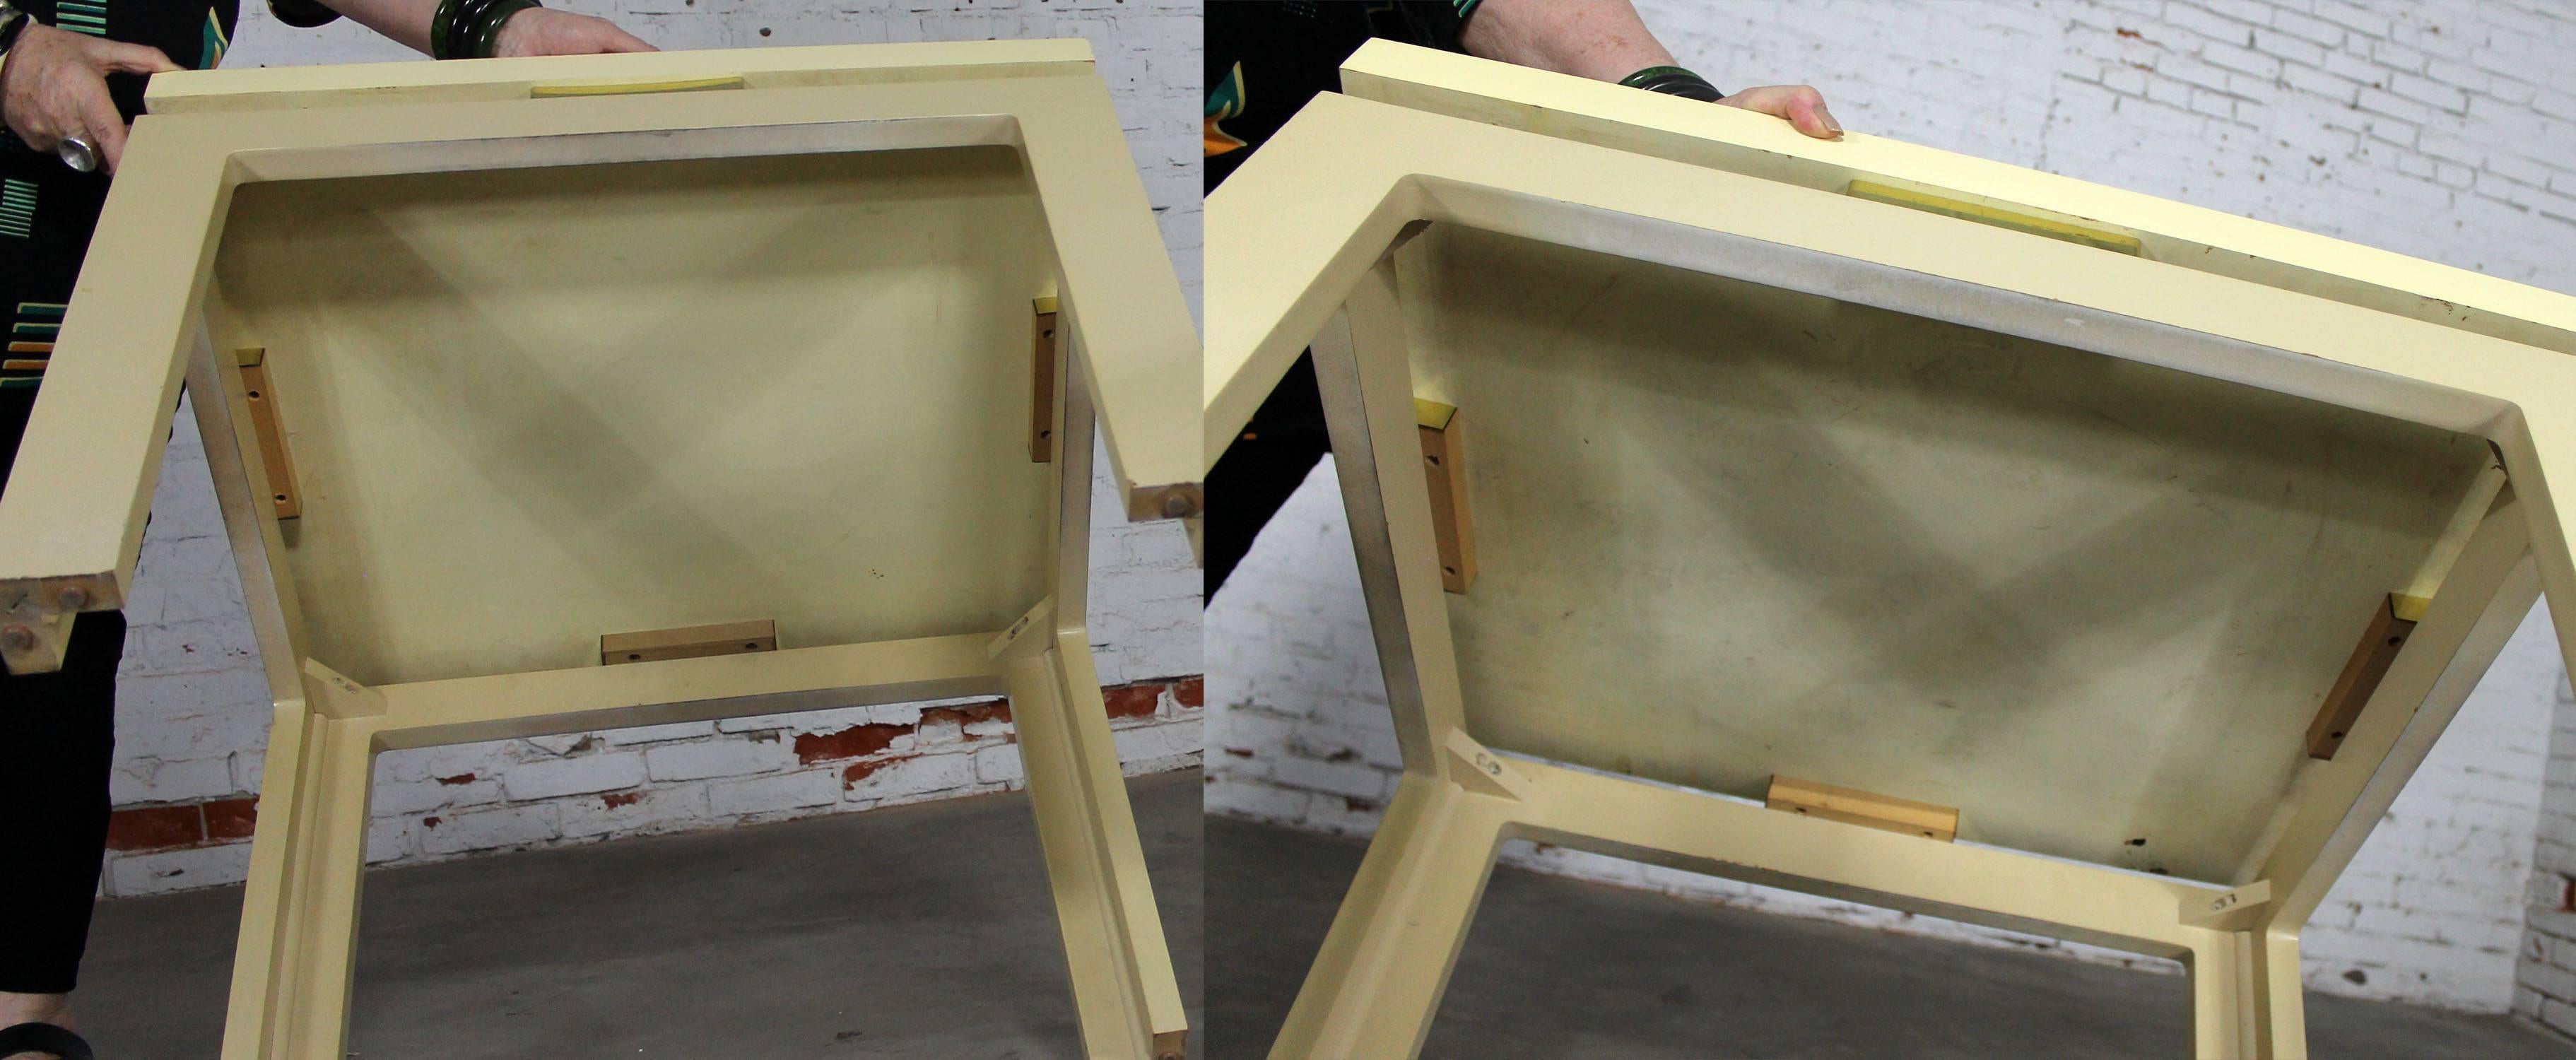 Pair of Modern, circa 1970s Off-White Lacquered Parsons Side Tables 2